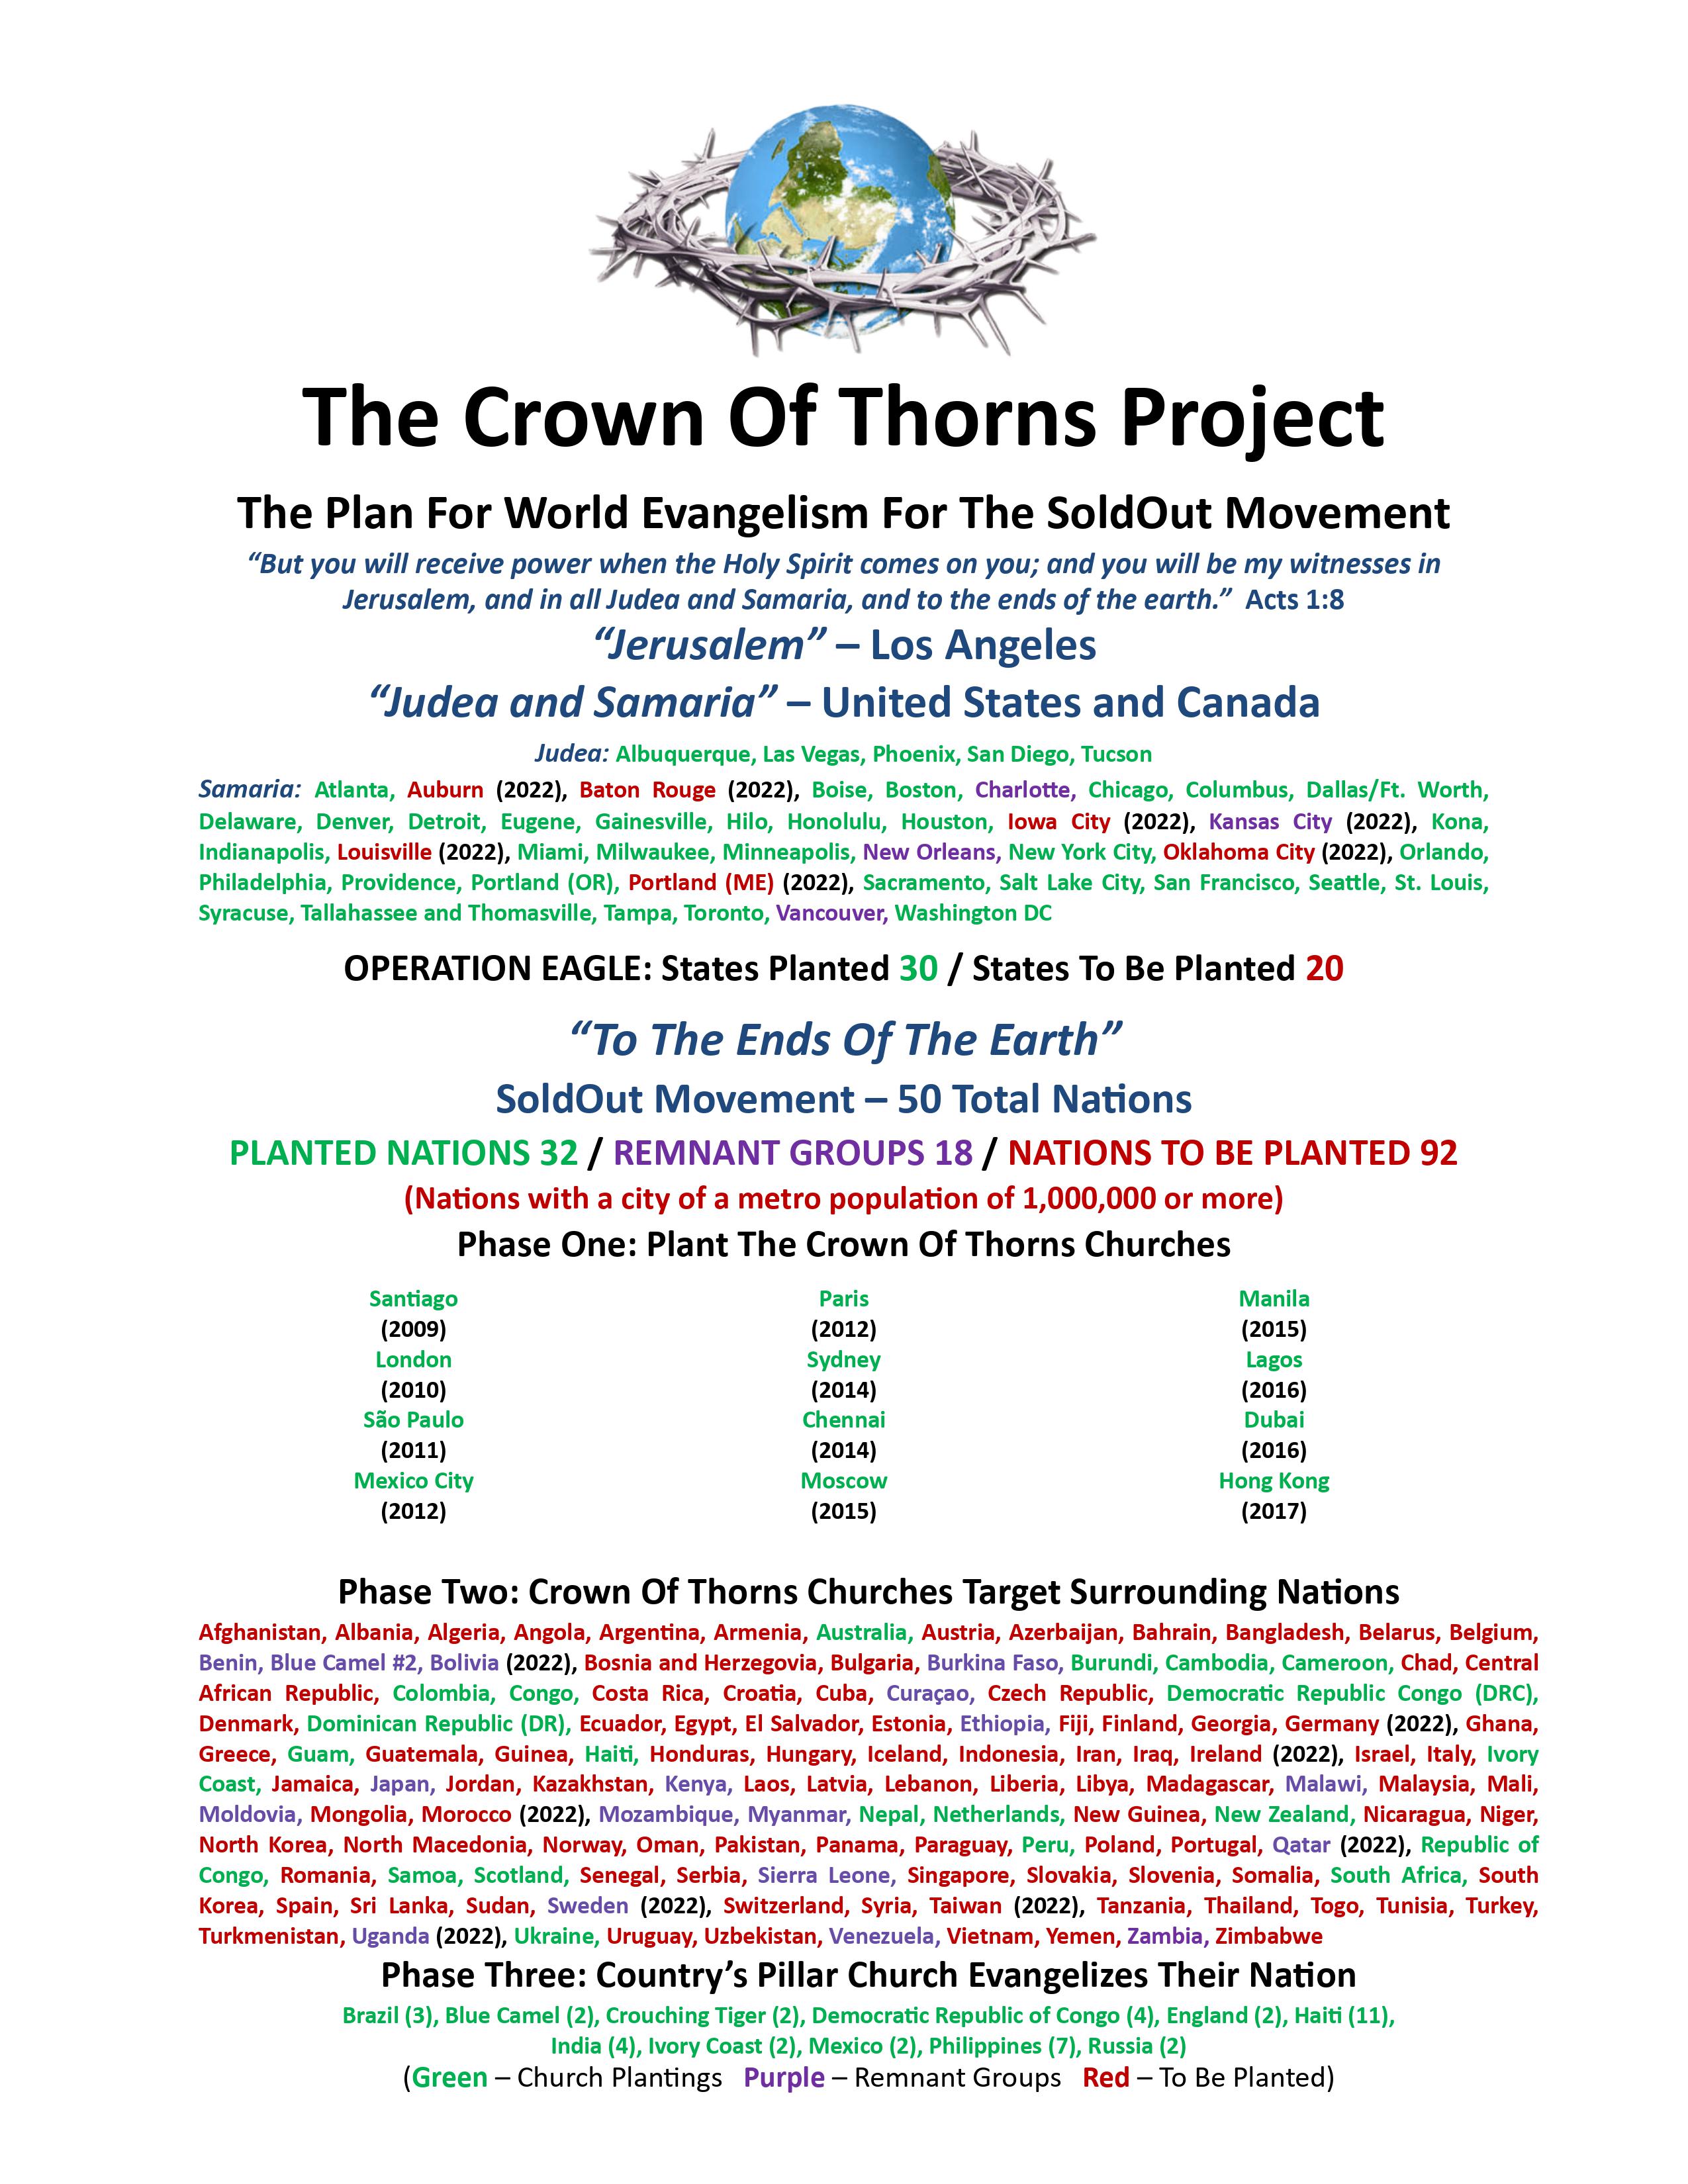 The Crown of Thorns Project shows the churches that have been planted from 2007 - 2022